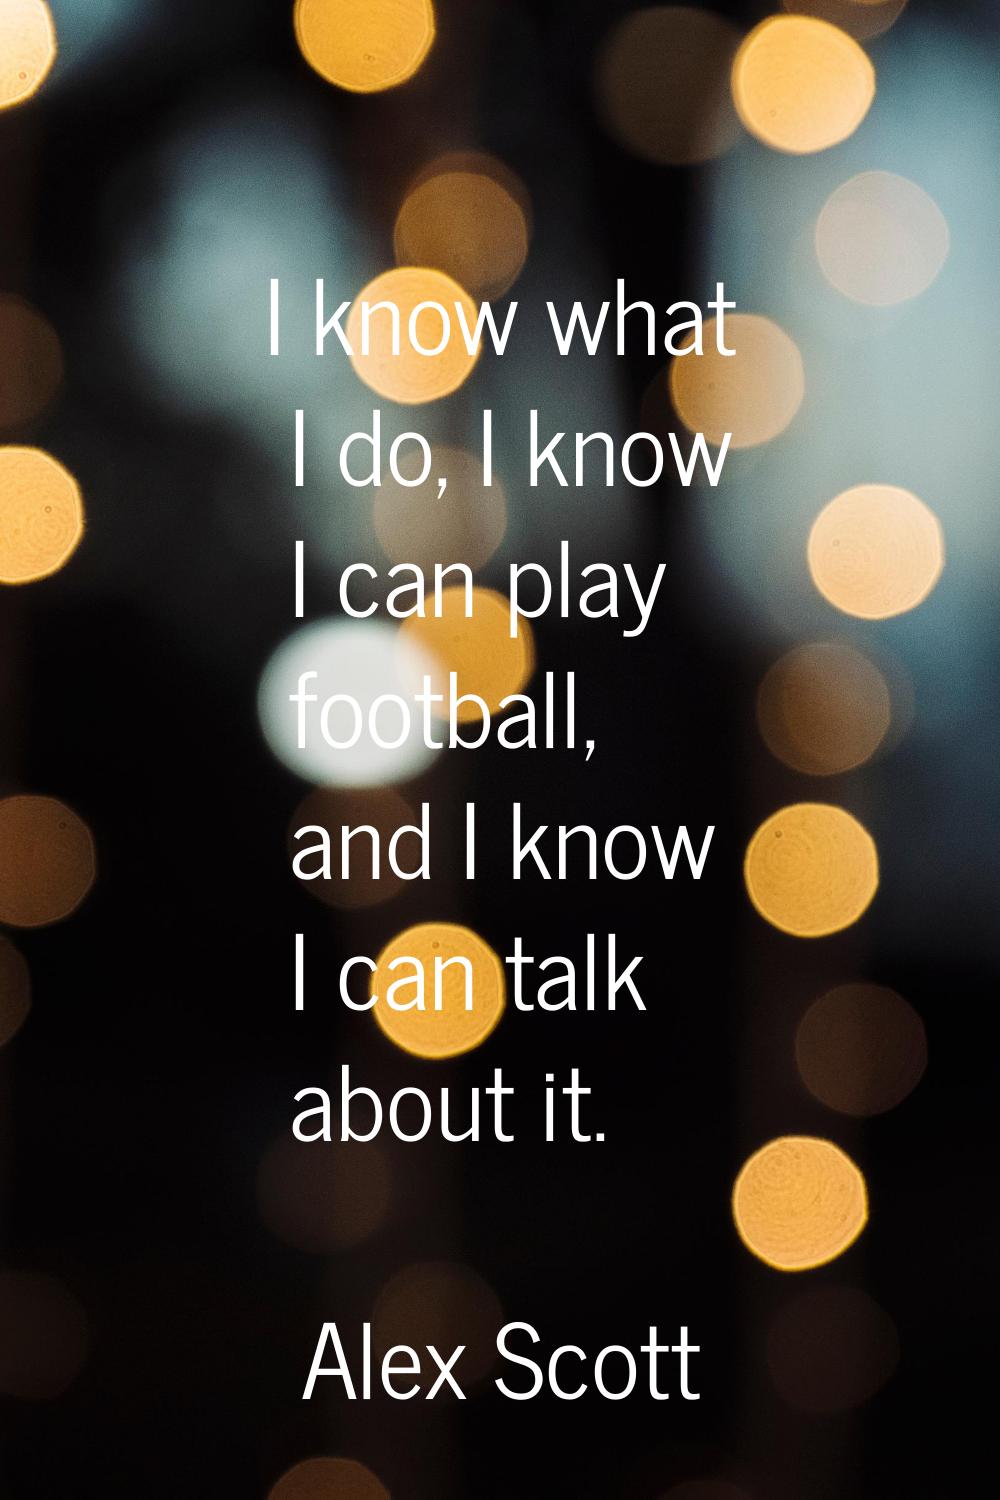 I know what I do, I know I can play football, and I know I can talk about it.